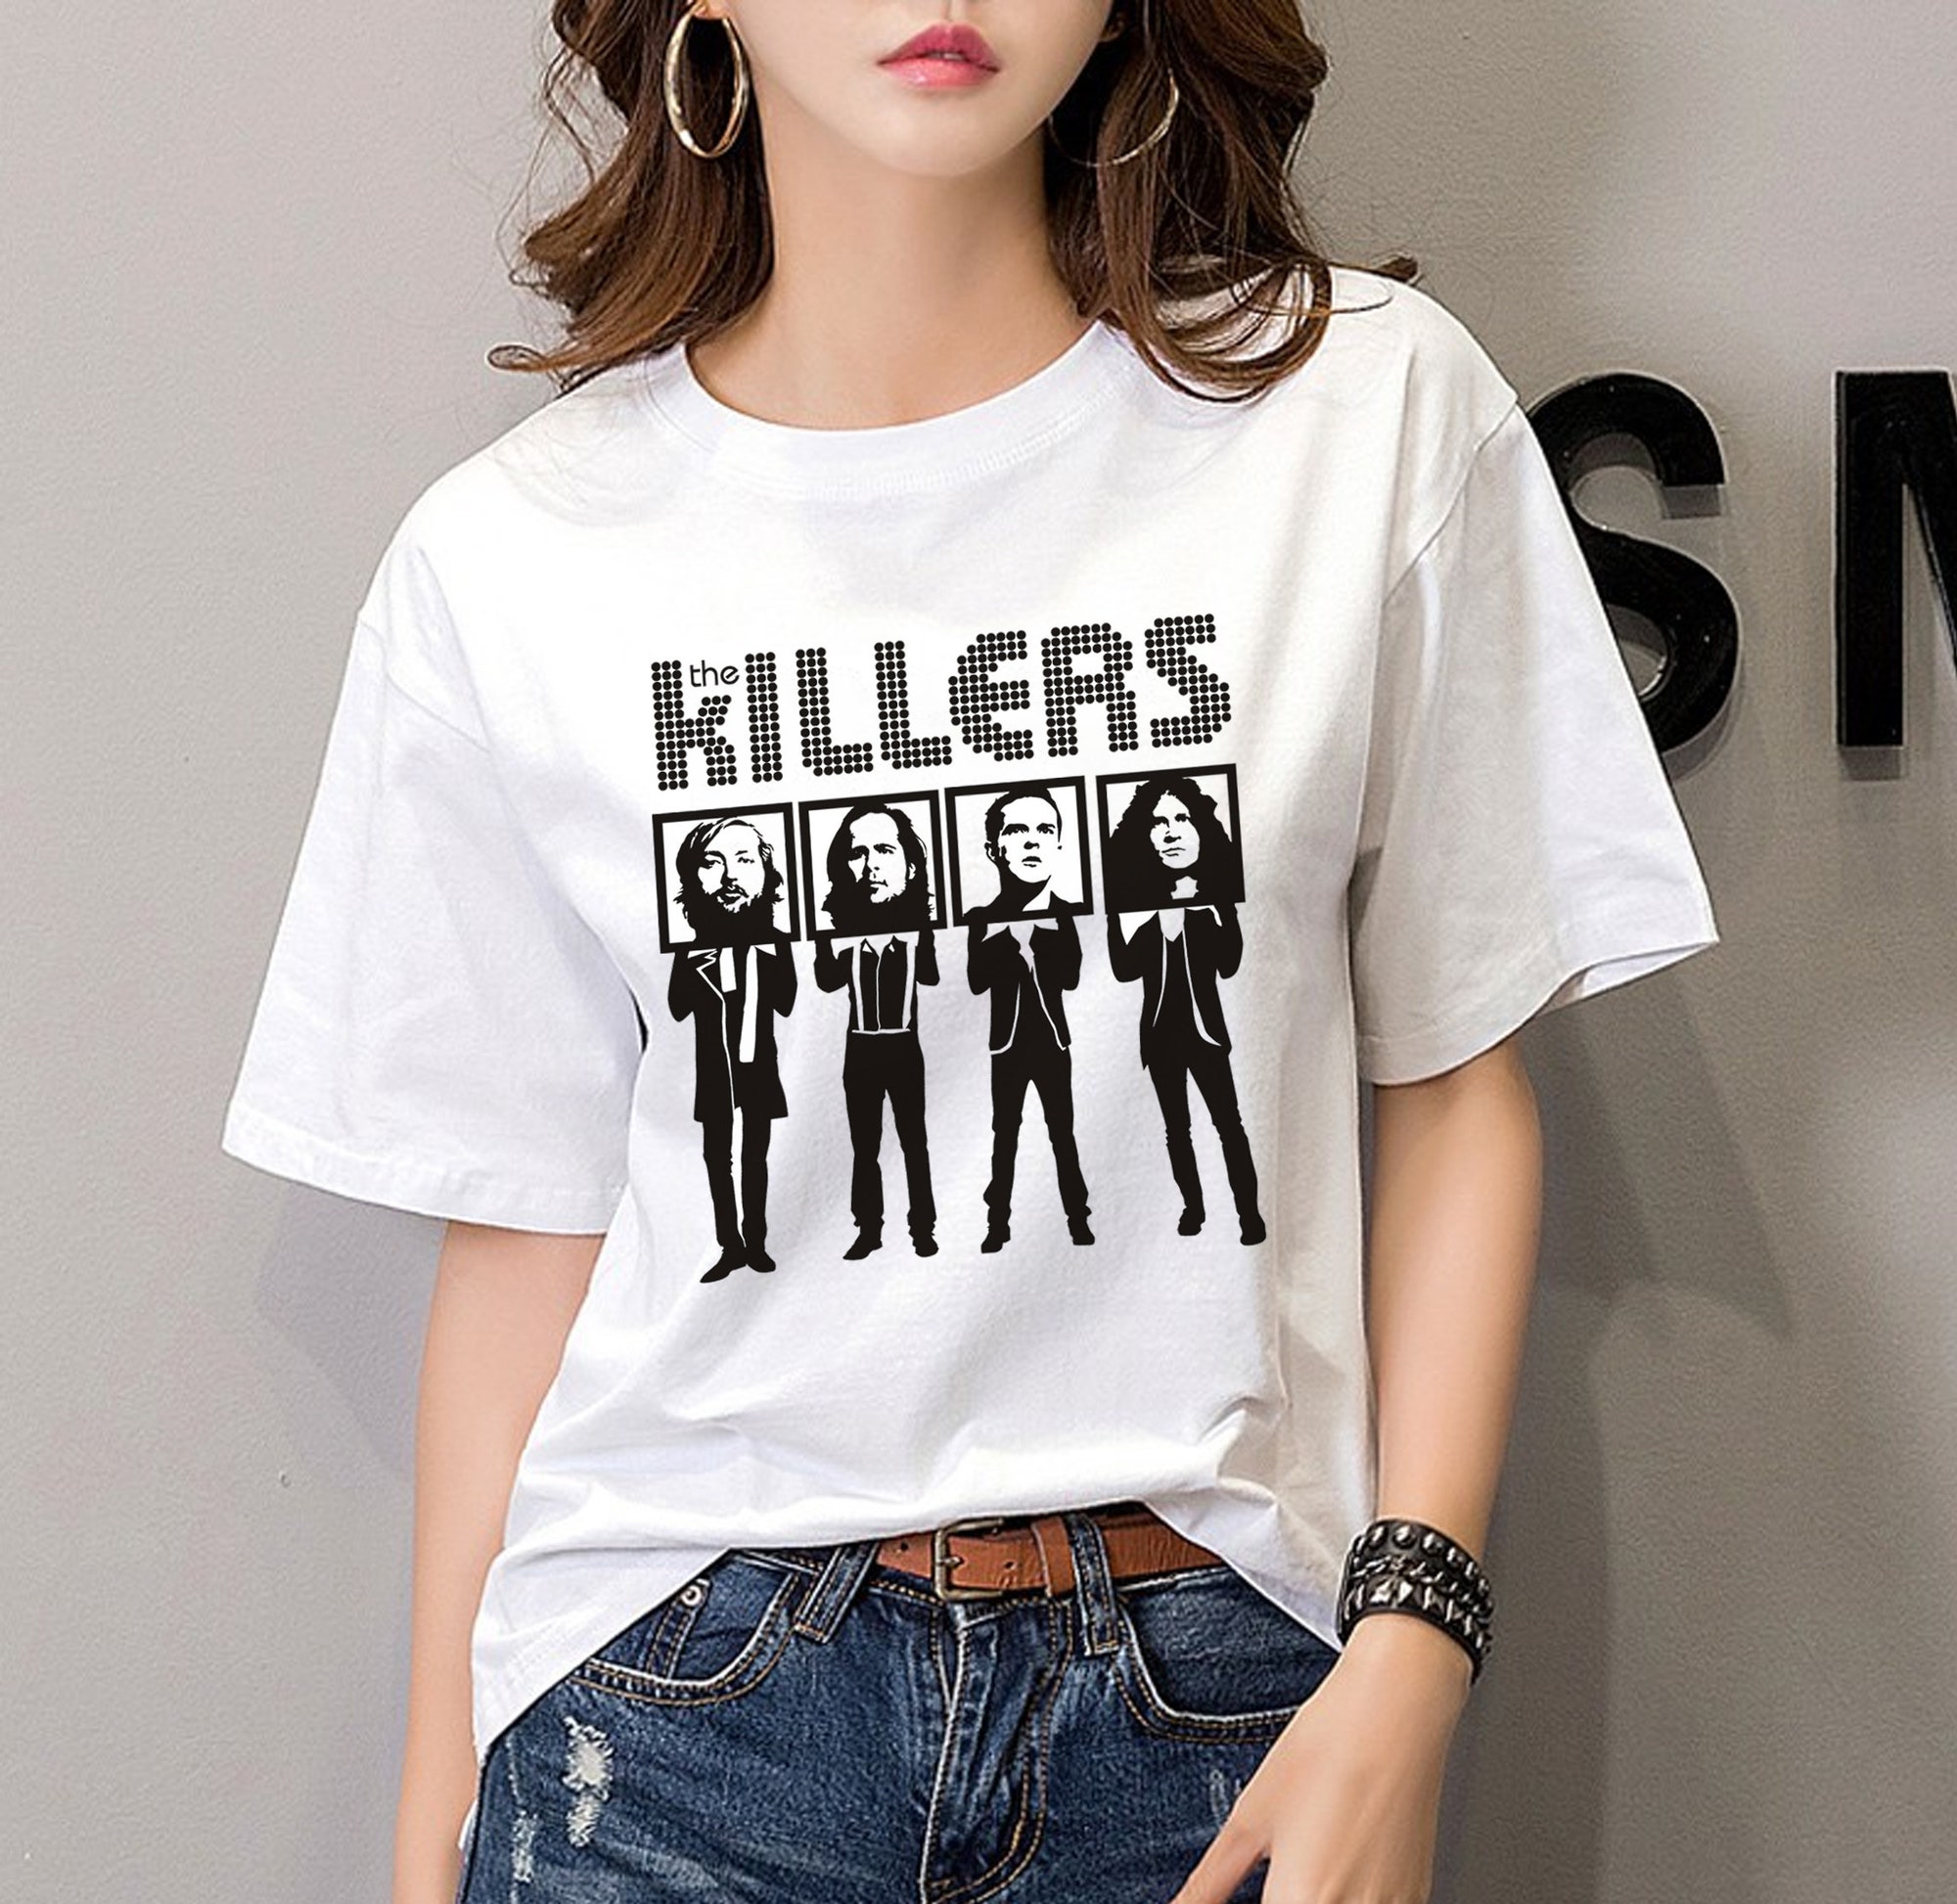 Discover The Killers Rock Band Shirt, Vintage The Killers Pressure Machine 90s Style Shirt